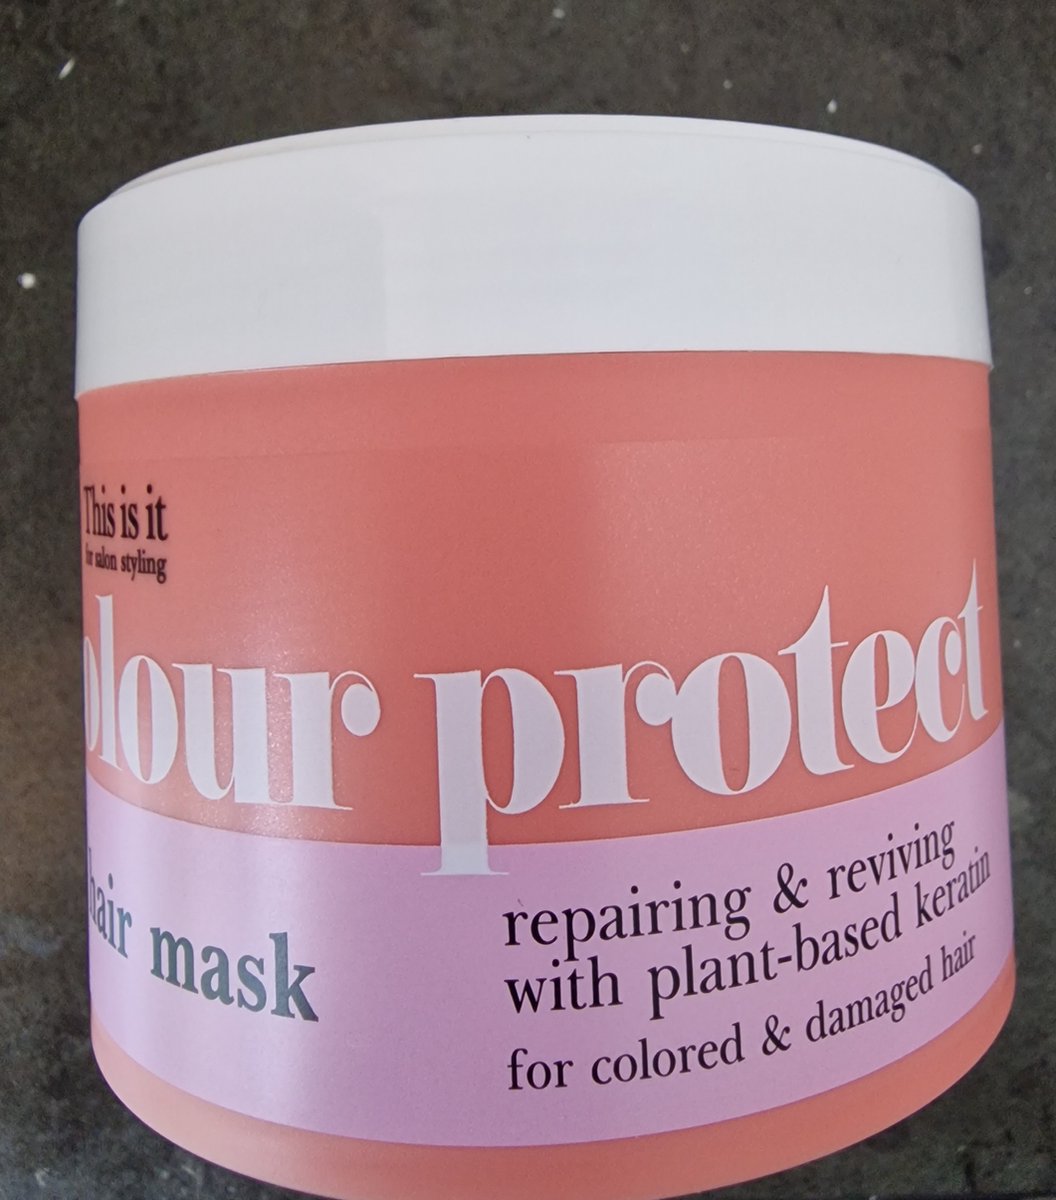 This is it, Colour Protect Hair Mask 300ml, With Plant-based Keratin for Coloured and Damaged hair